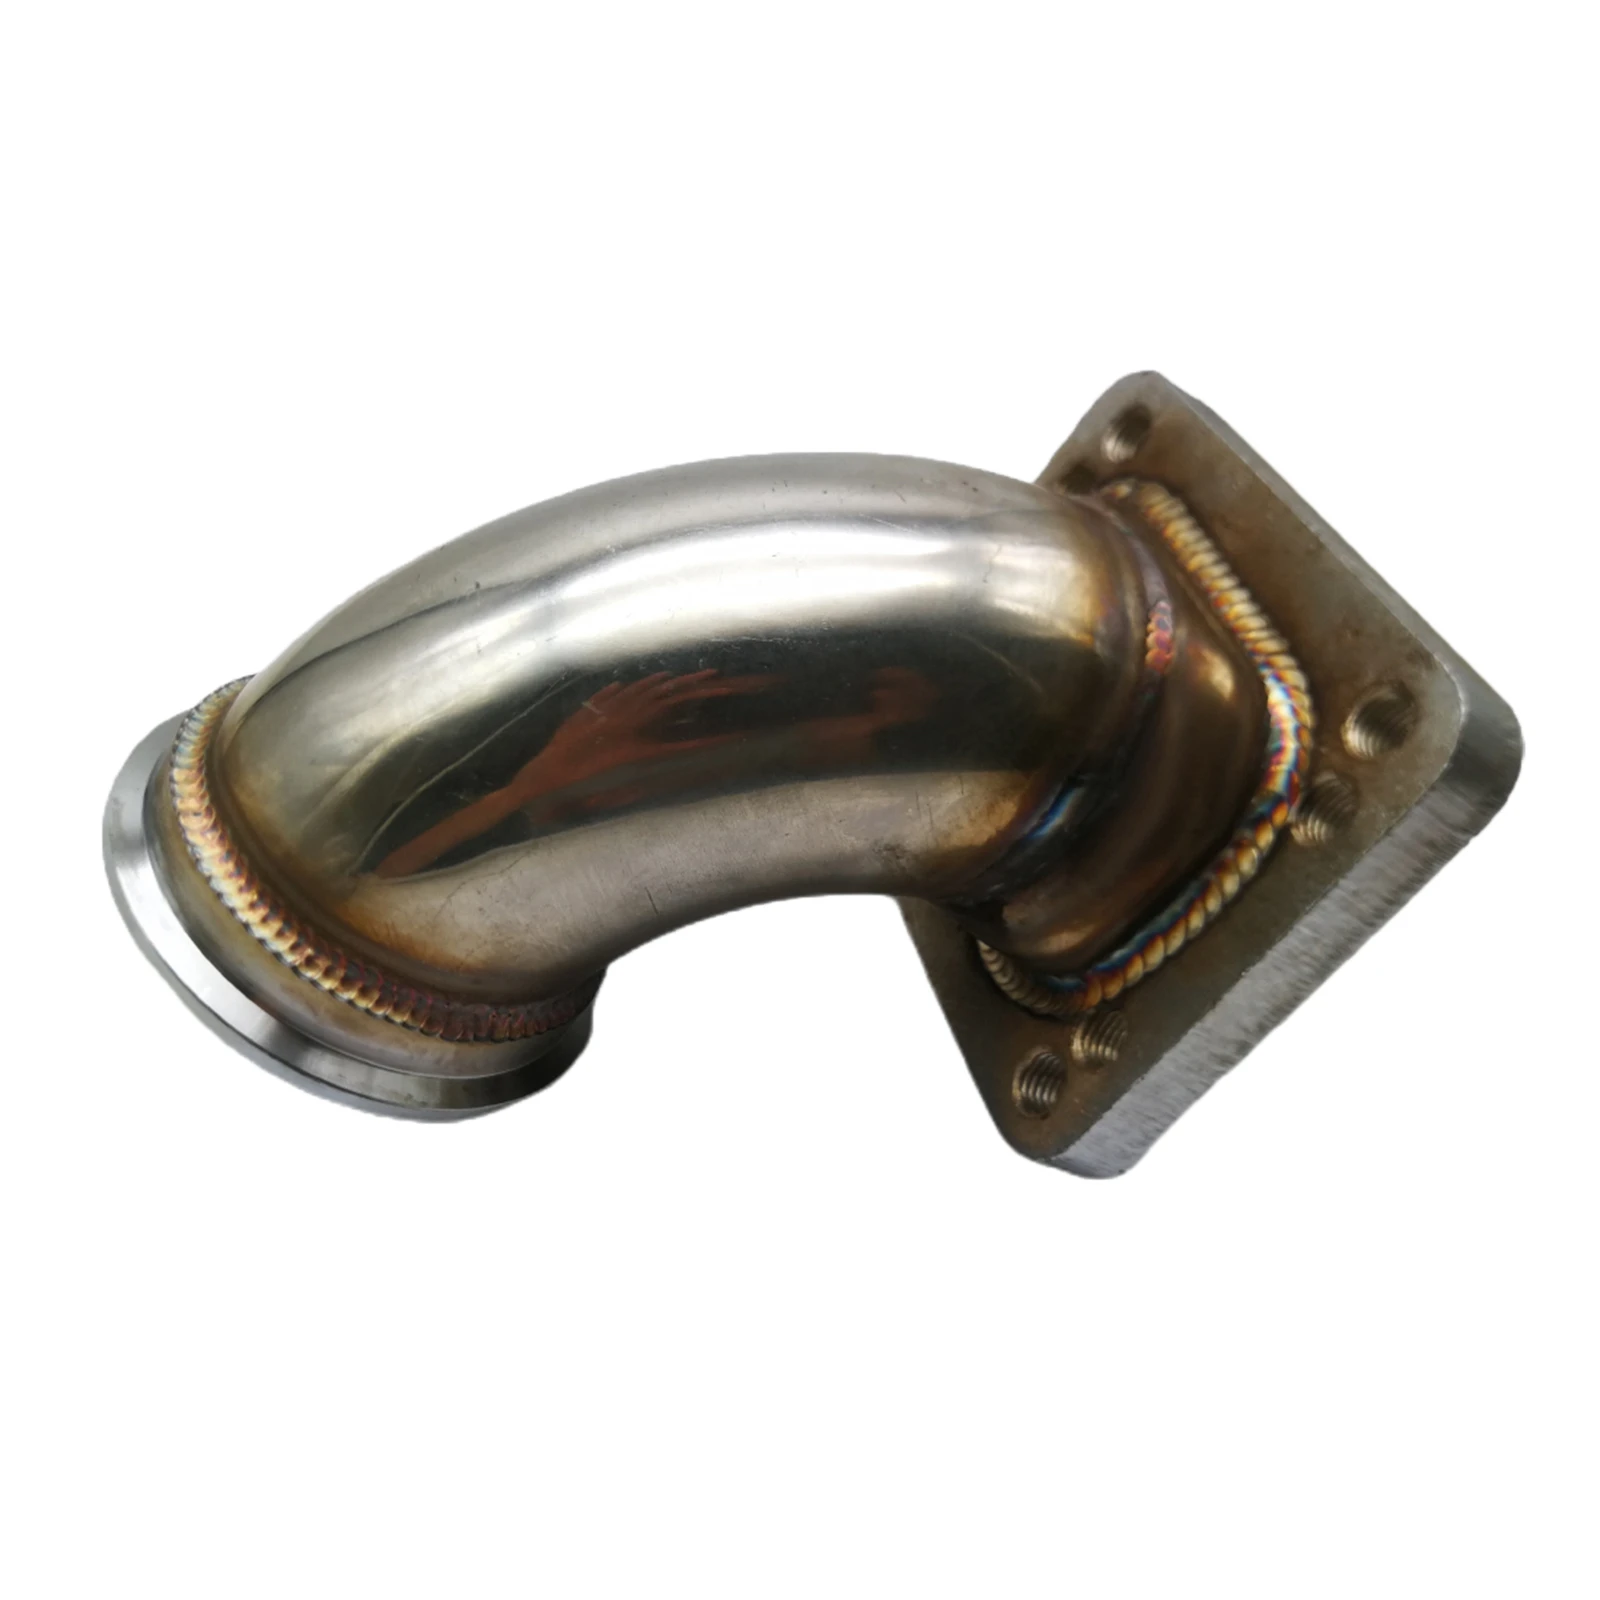 Vehicle Stainless Steel 64mm/2.5inch V-Band 90 Degree Cast Elbow Adapter Flange T3 T4 Turbo Exhaust Car Accessories